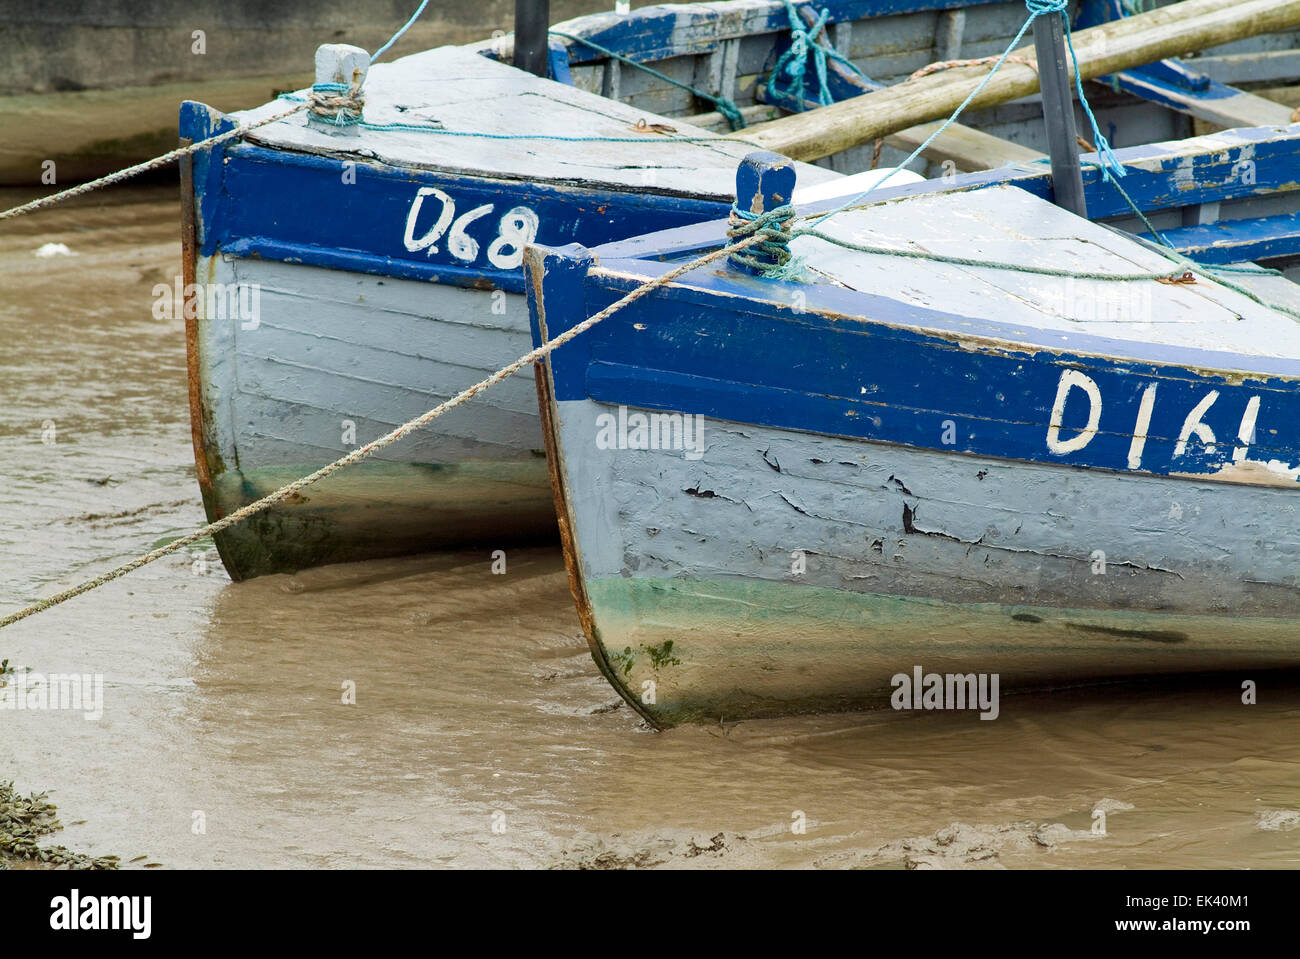 Two Boats in a harbour in Irland Europe Stock Photo